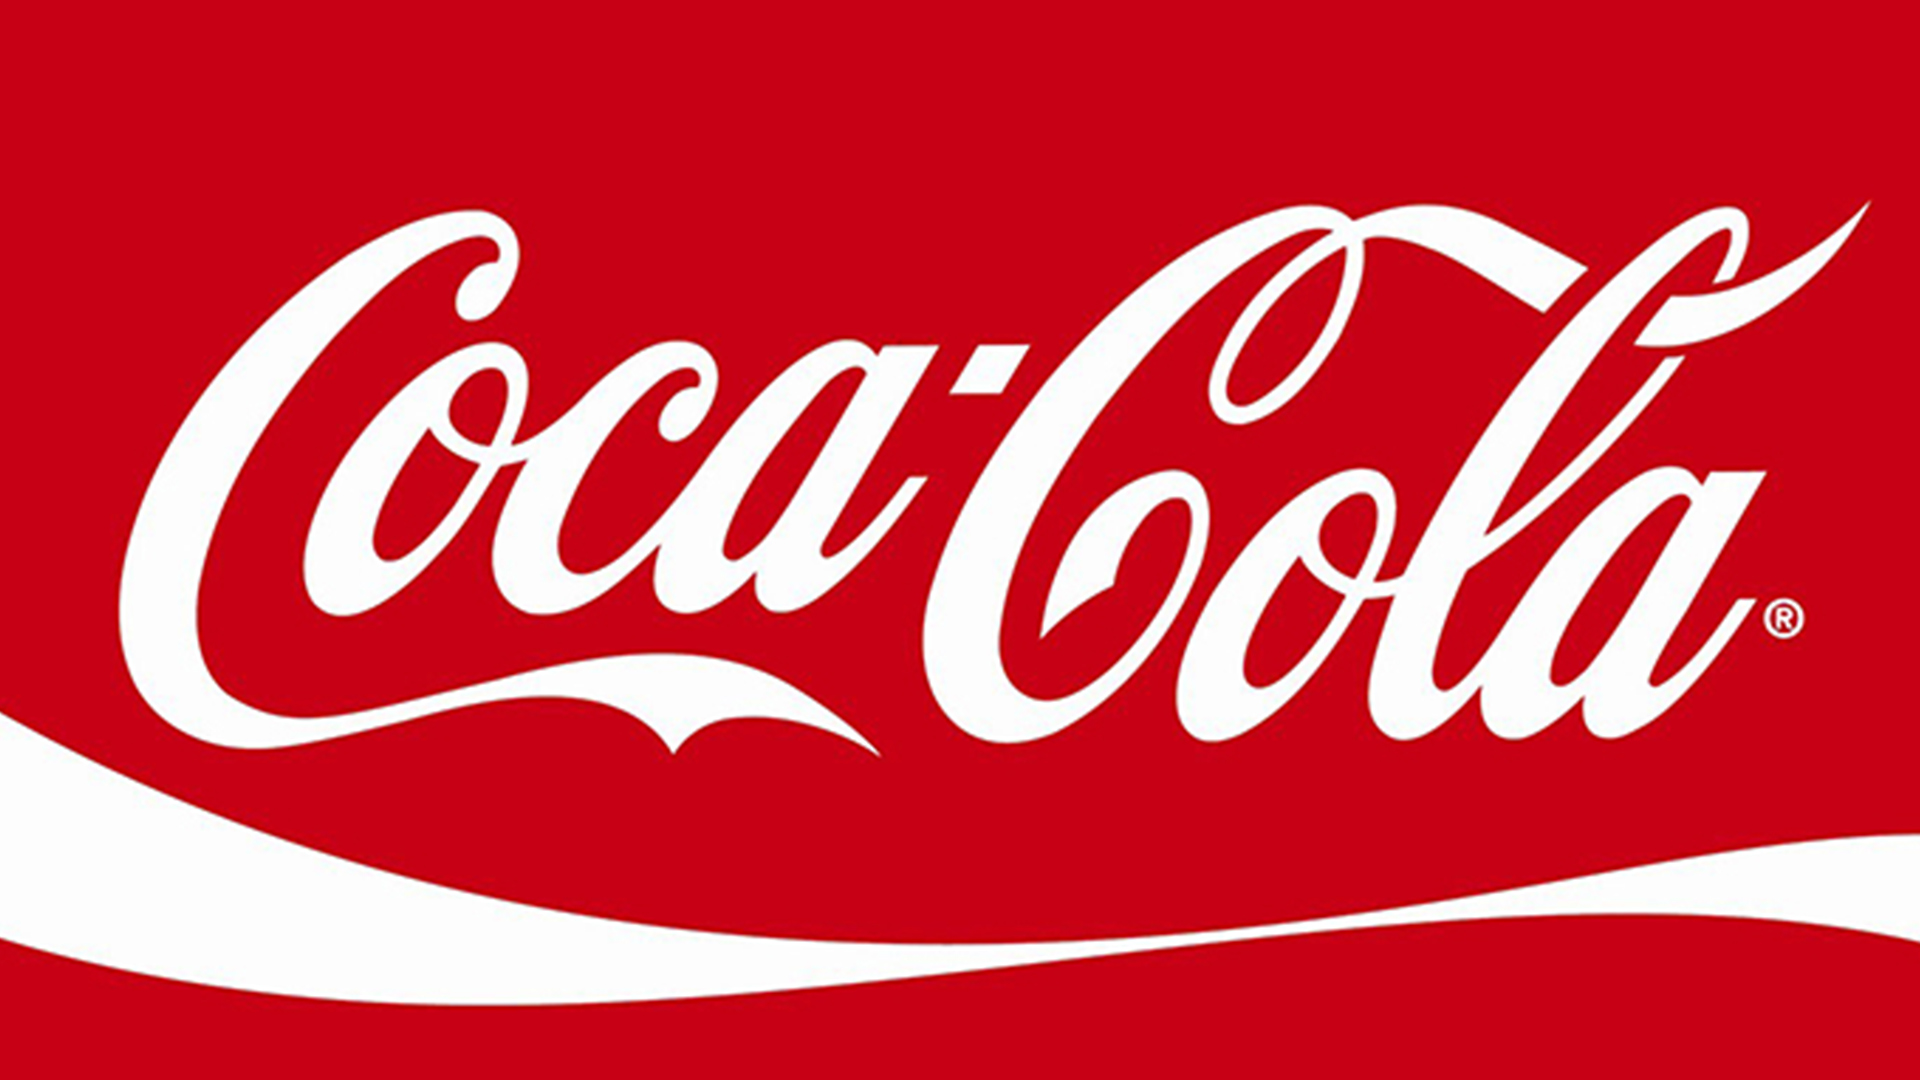 The 10 Best Logos Of All Time | Creative Bloq